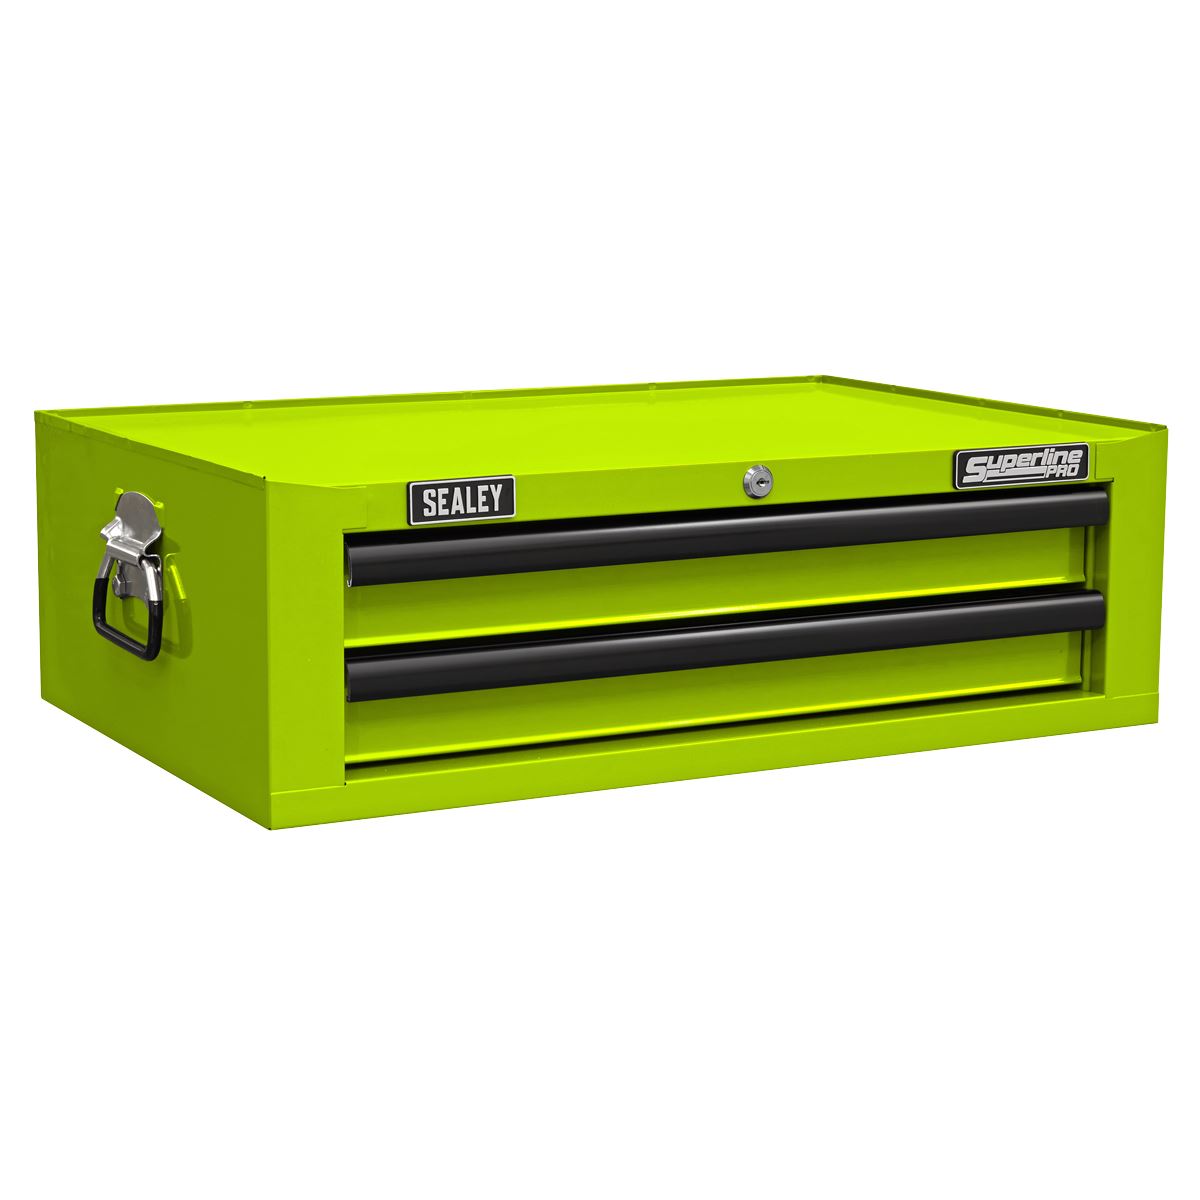 Sealey Superline Pro Mid-Box 2 Drawer with Ball-Bearing Slides - Green/Black